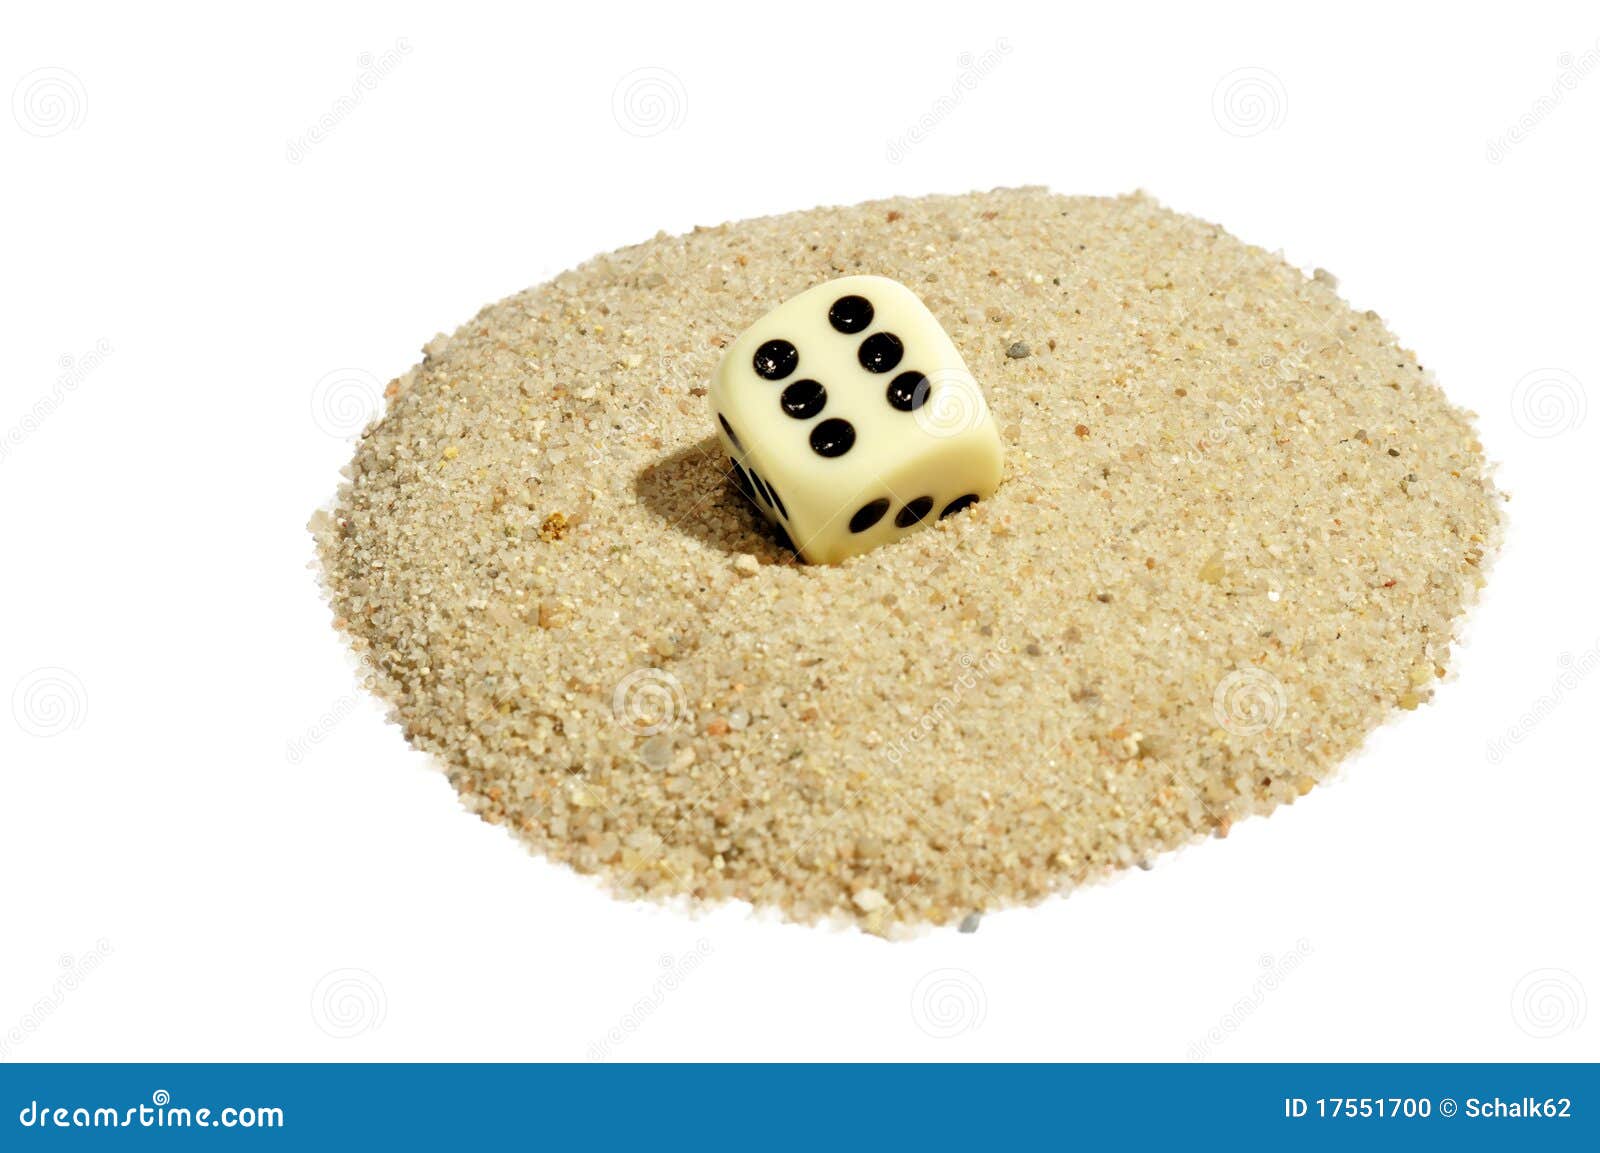 Dice on Sand. Dice on bright sand heap isolated